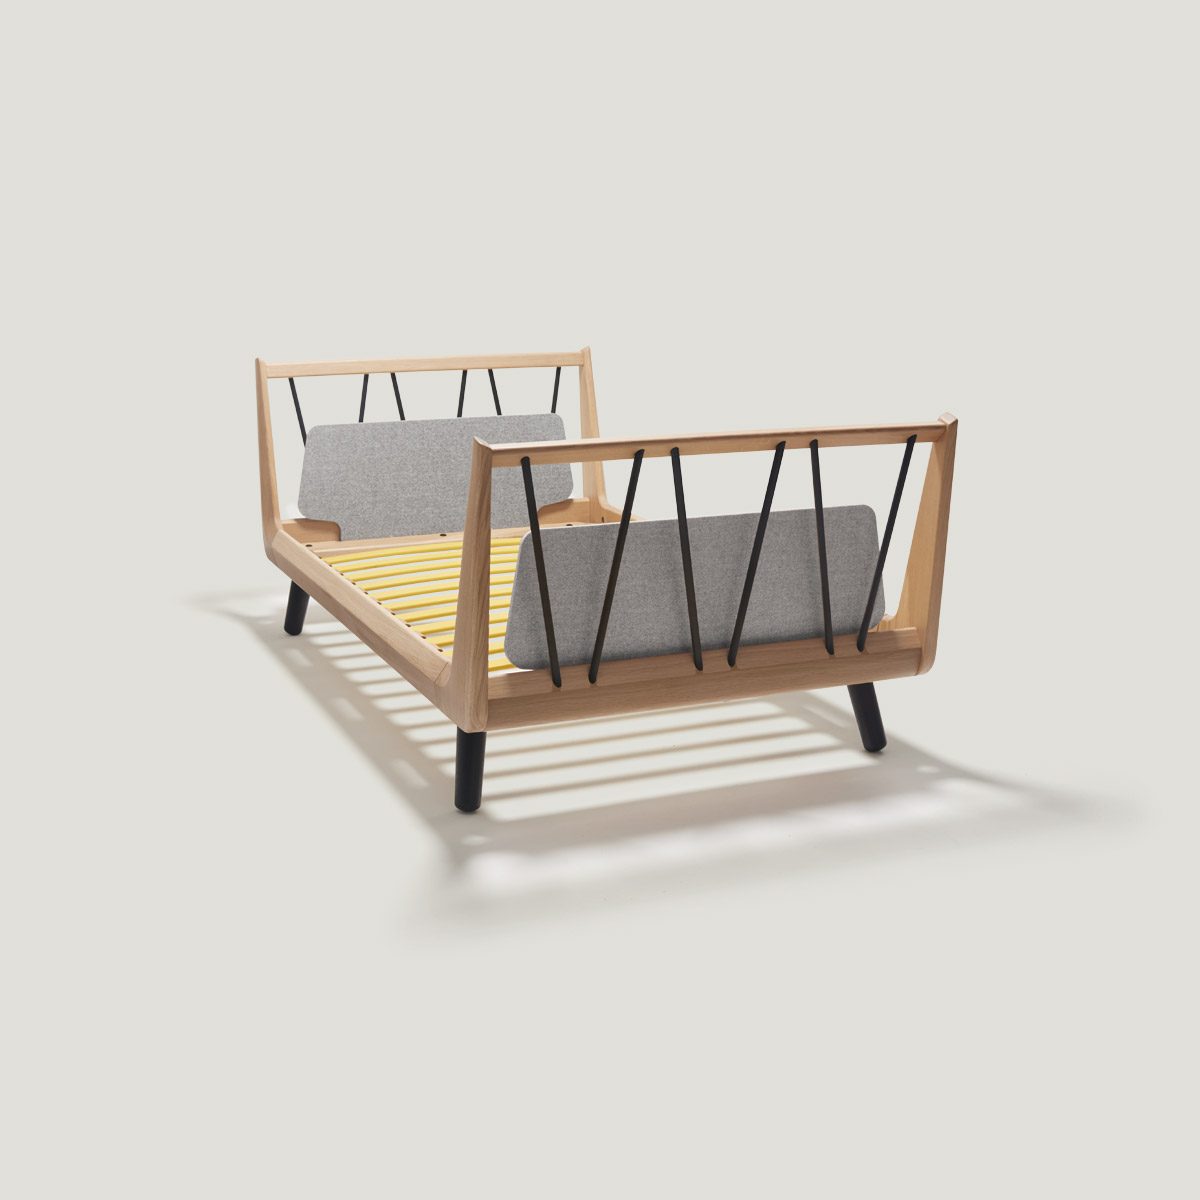 VII classic junior bed – made of solid oak.